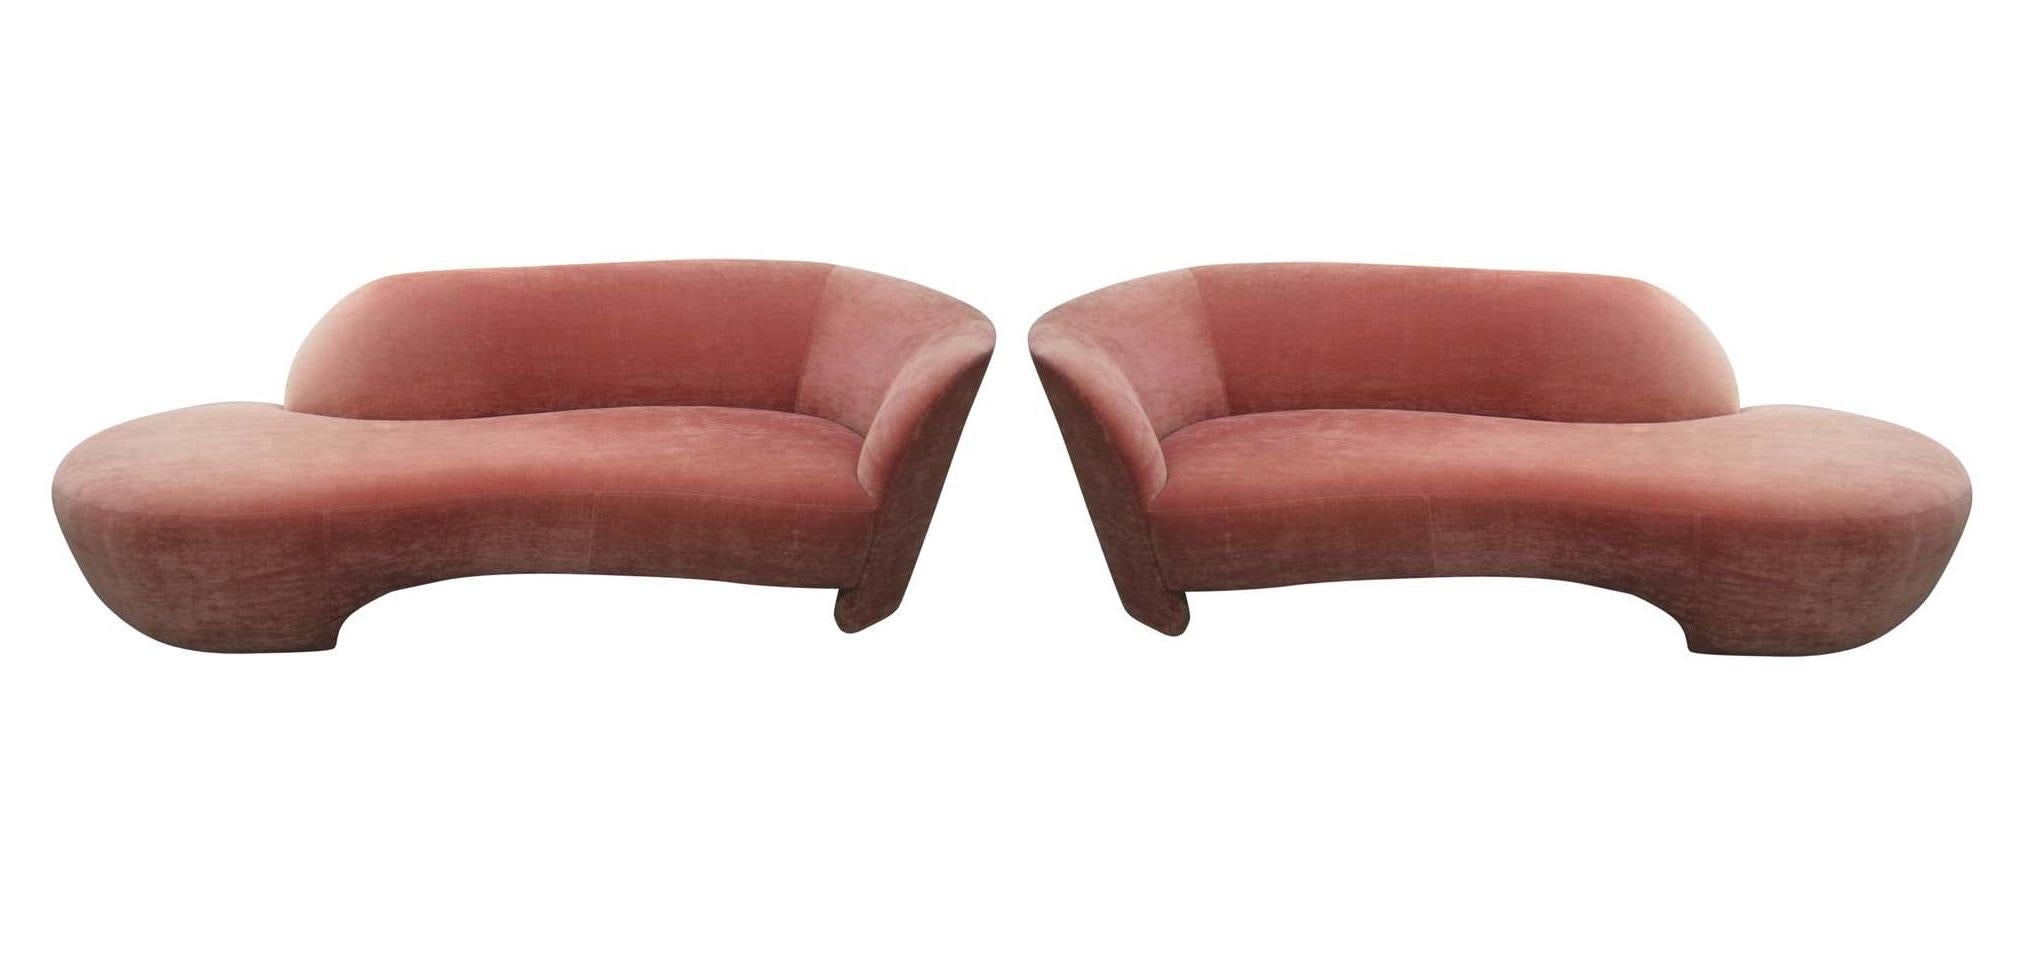 Gorgeous chaise lounge sofas designed by Vladimir Kagan for Weiman Preview. Each modern sculpted one arm sofa features a flowing freeform backrest with unique cutaway style design. Professionally re-upholstered in a sumptuous rose velvet. These are